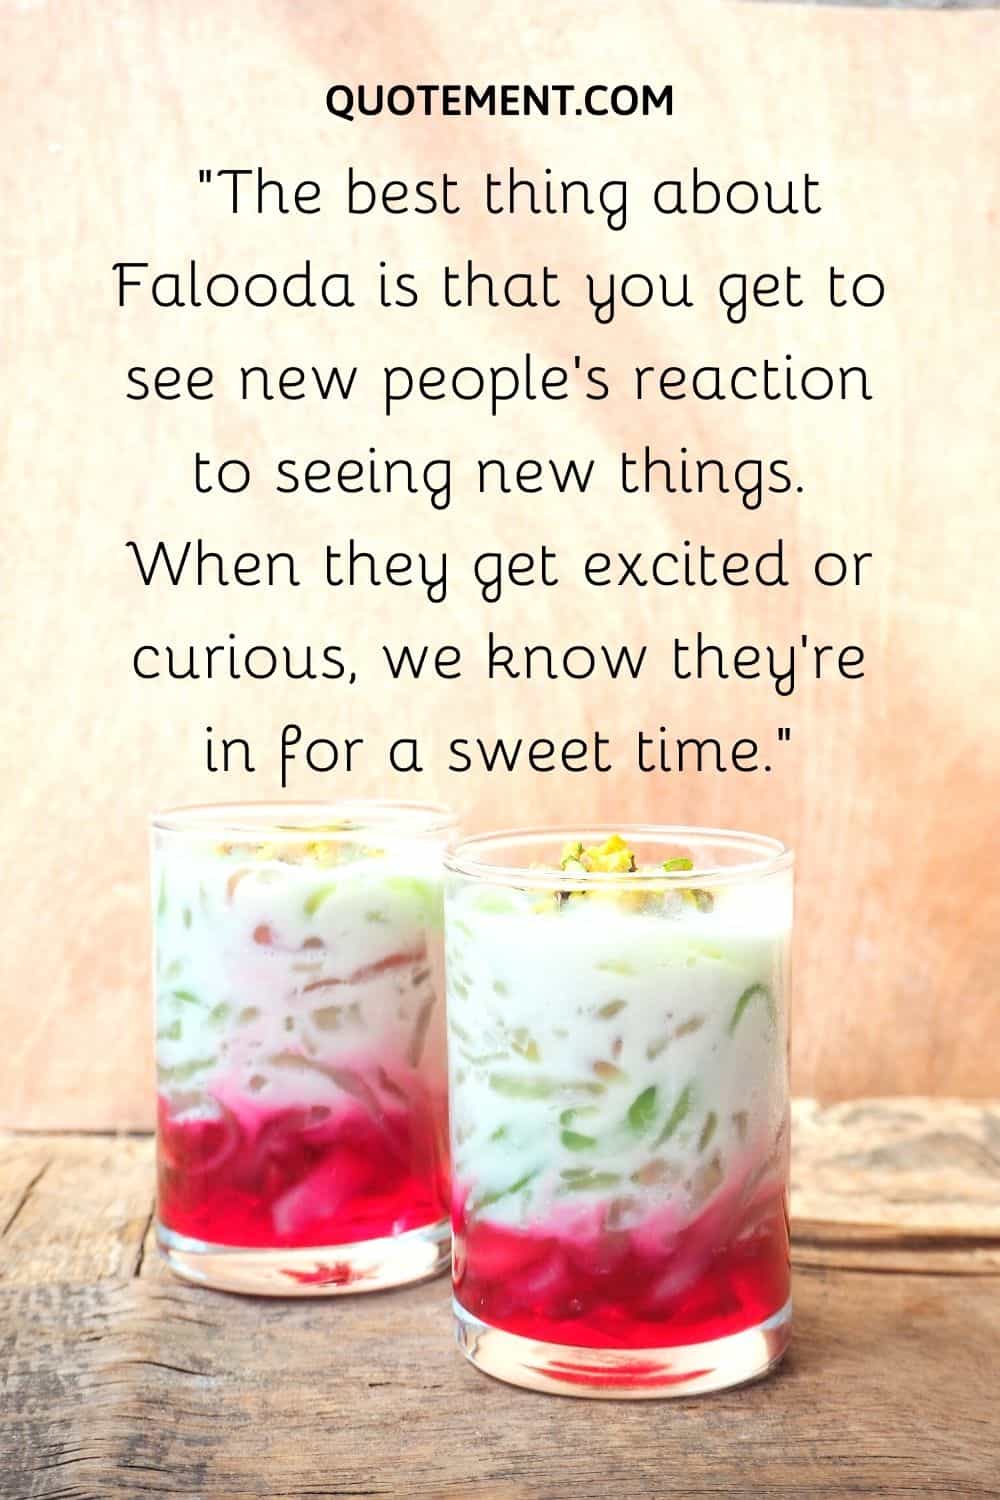 The best thing about Falooda is that you get to see new people’s reaction to seeing new things